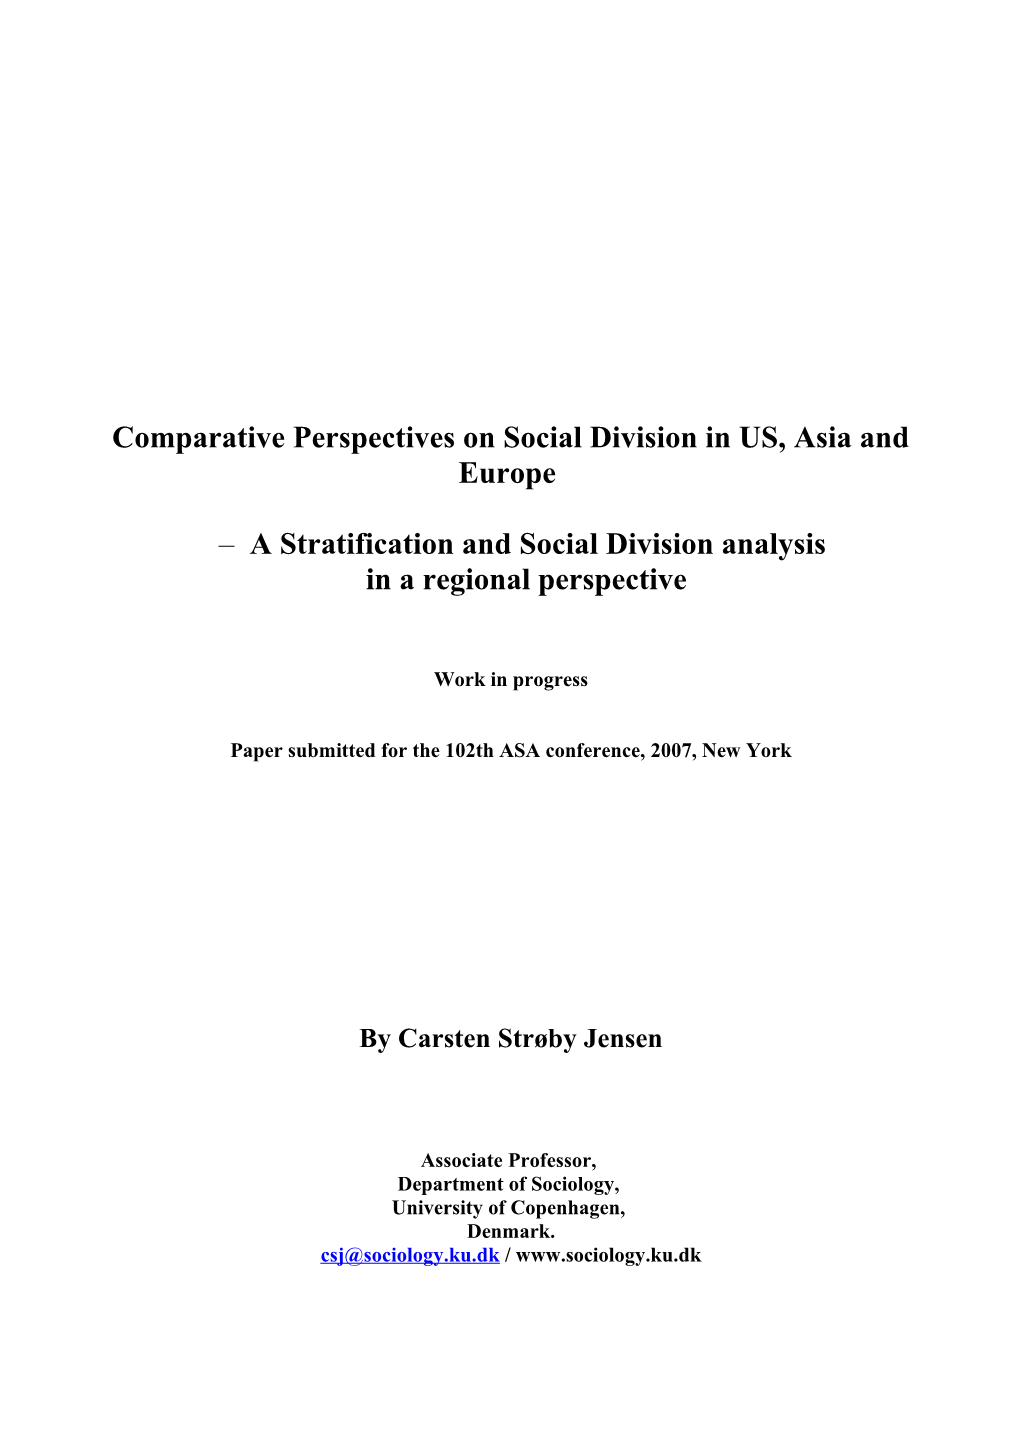 Comparative Perspectives on Social Division in US, Asia and Europe a Stratification And